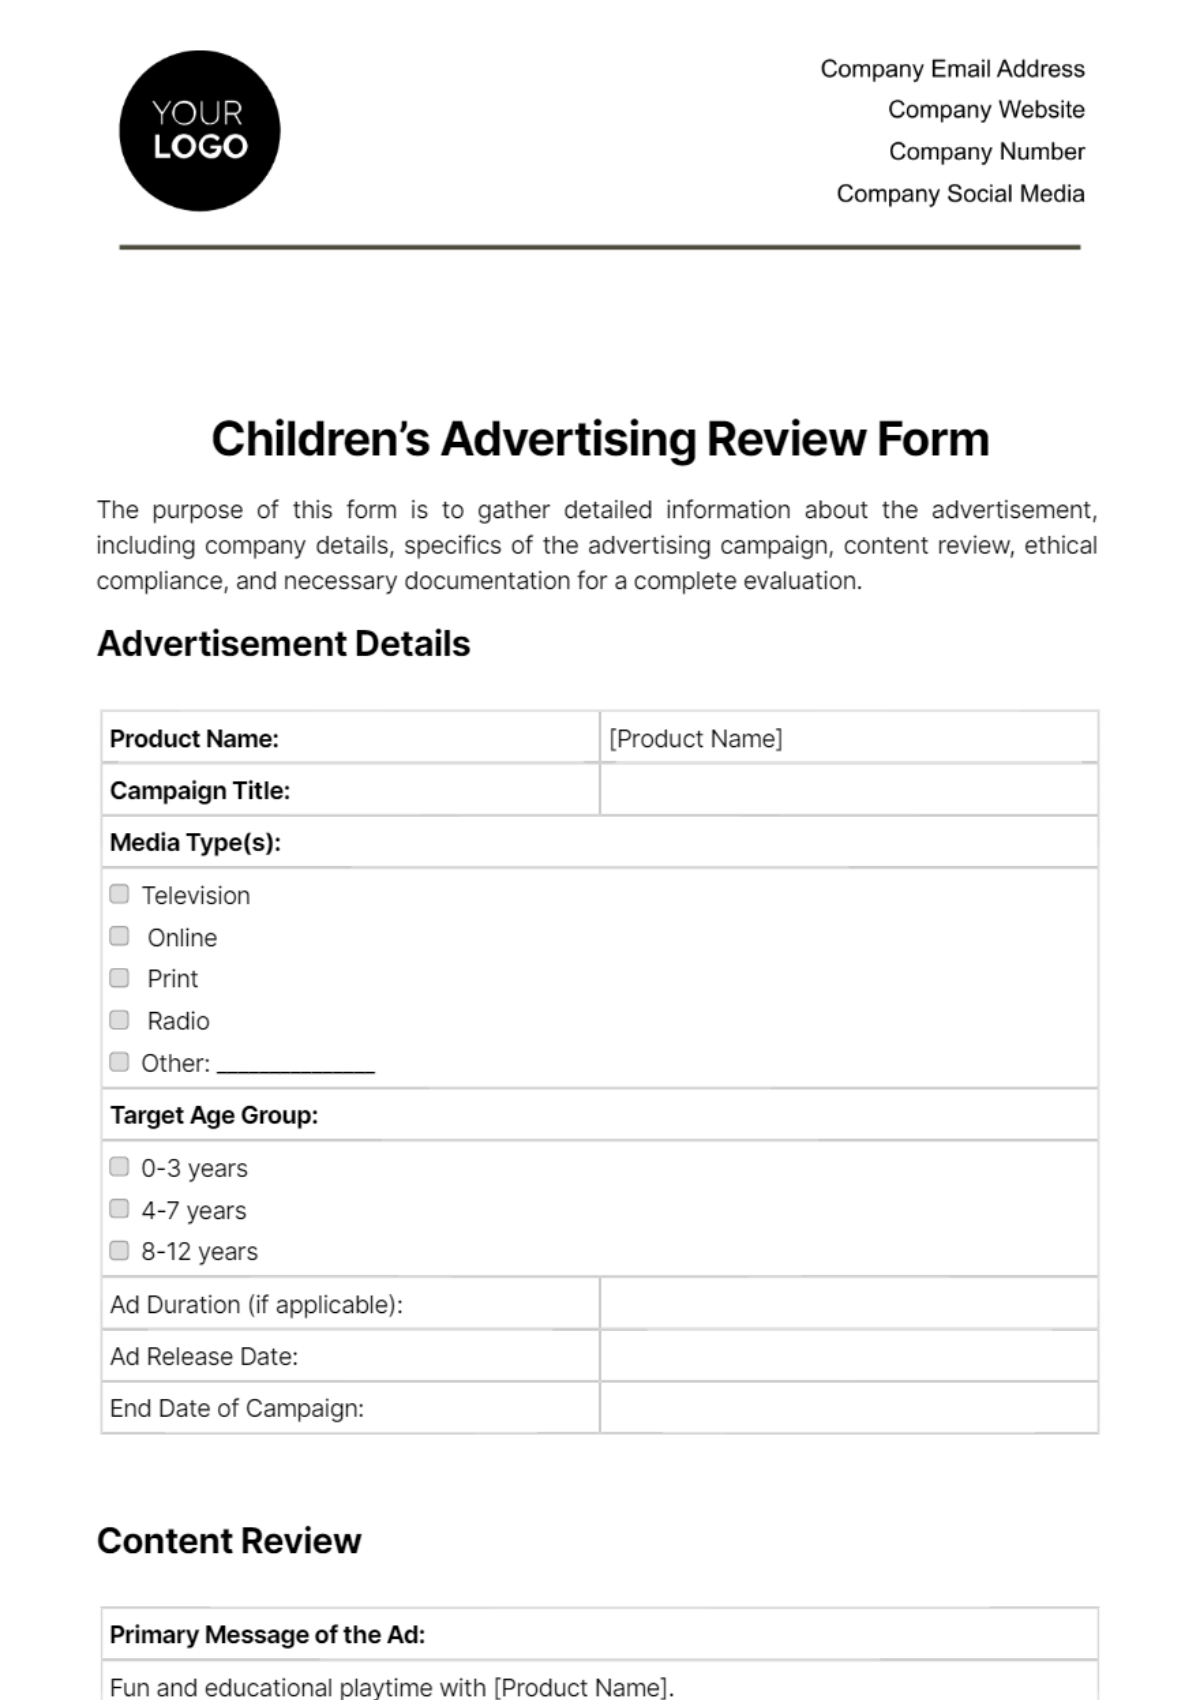 Children’s Advertising Review Form Template